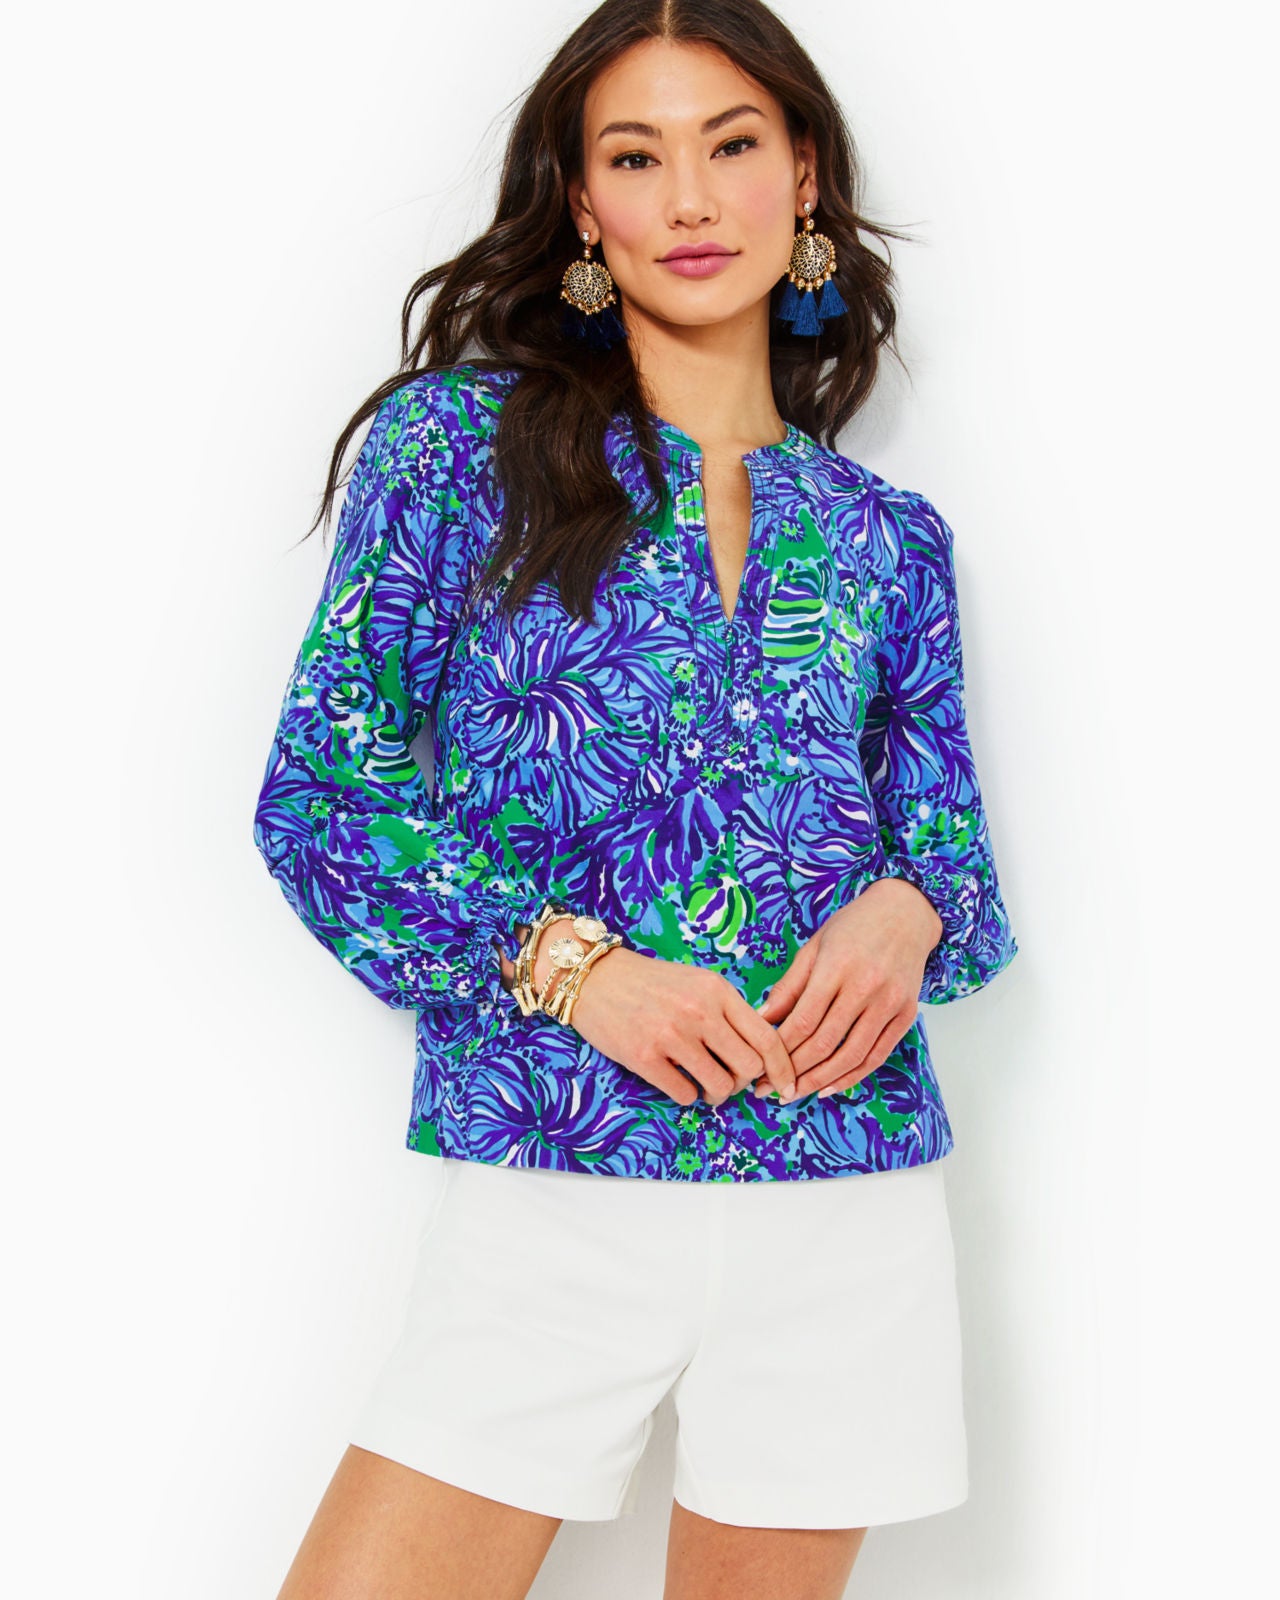 Coulter Long Sleeve Cotton Top